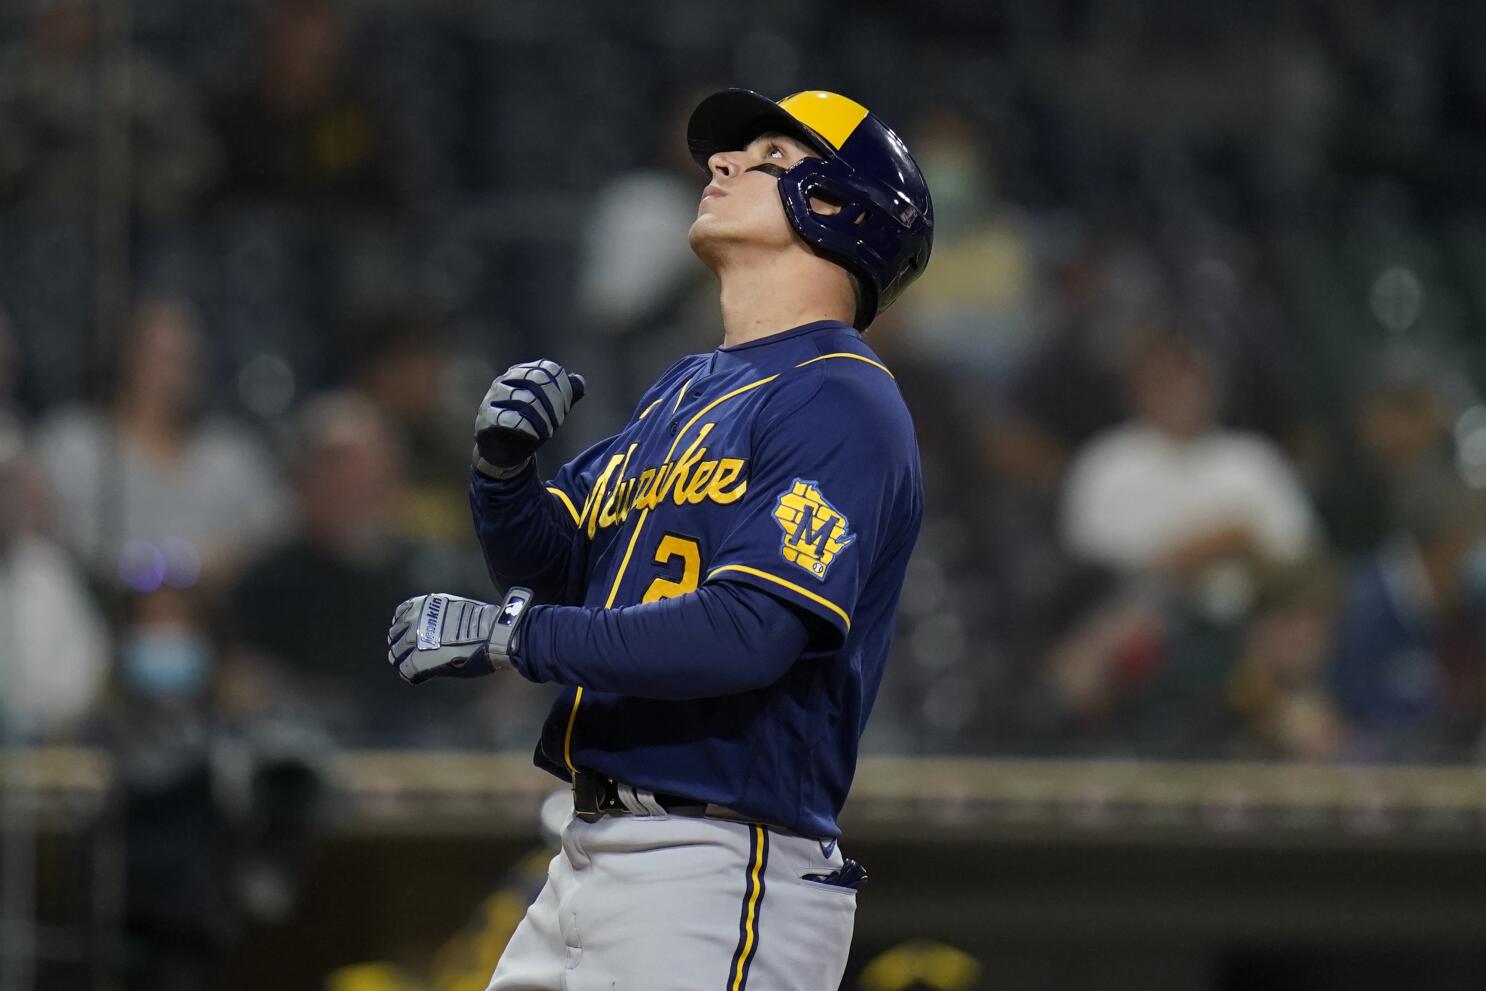 Luis Urias of the Milwaukee Brewers bats against the Chicago Cubs at